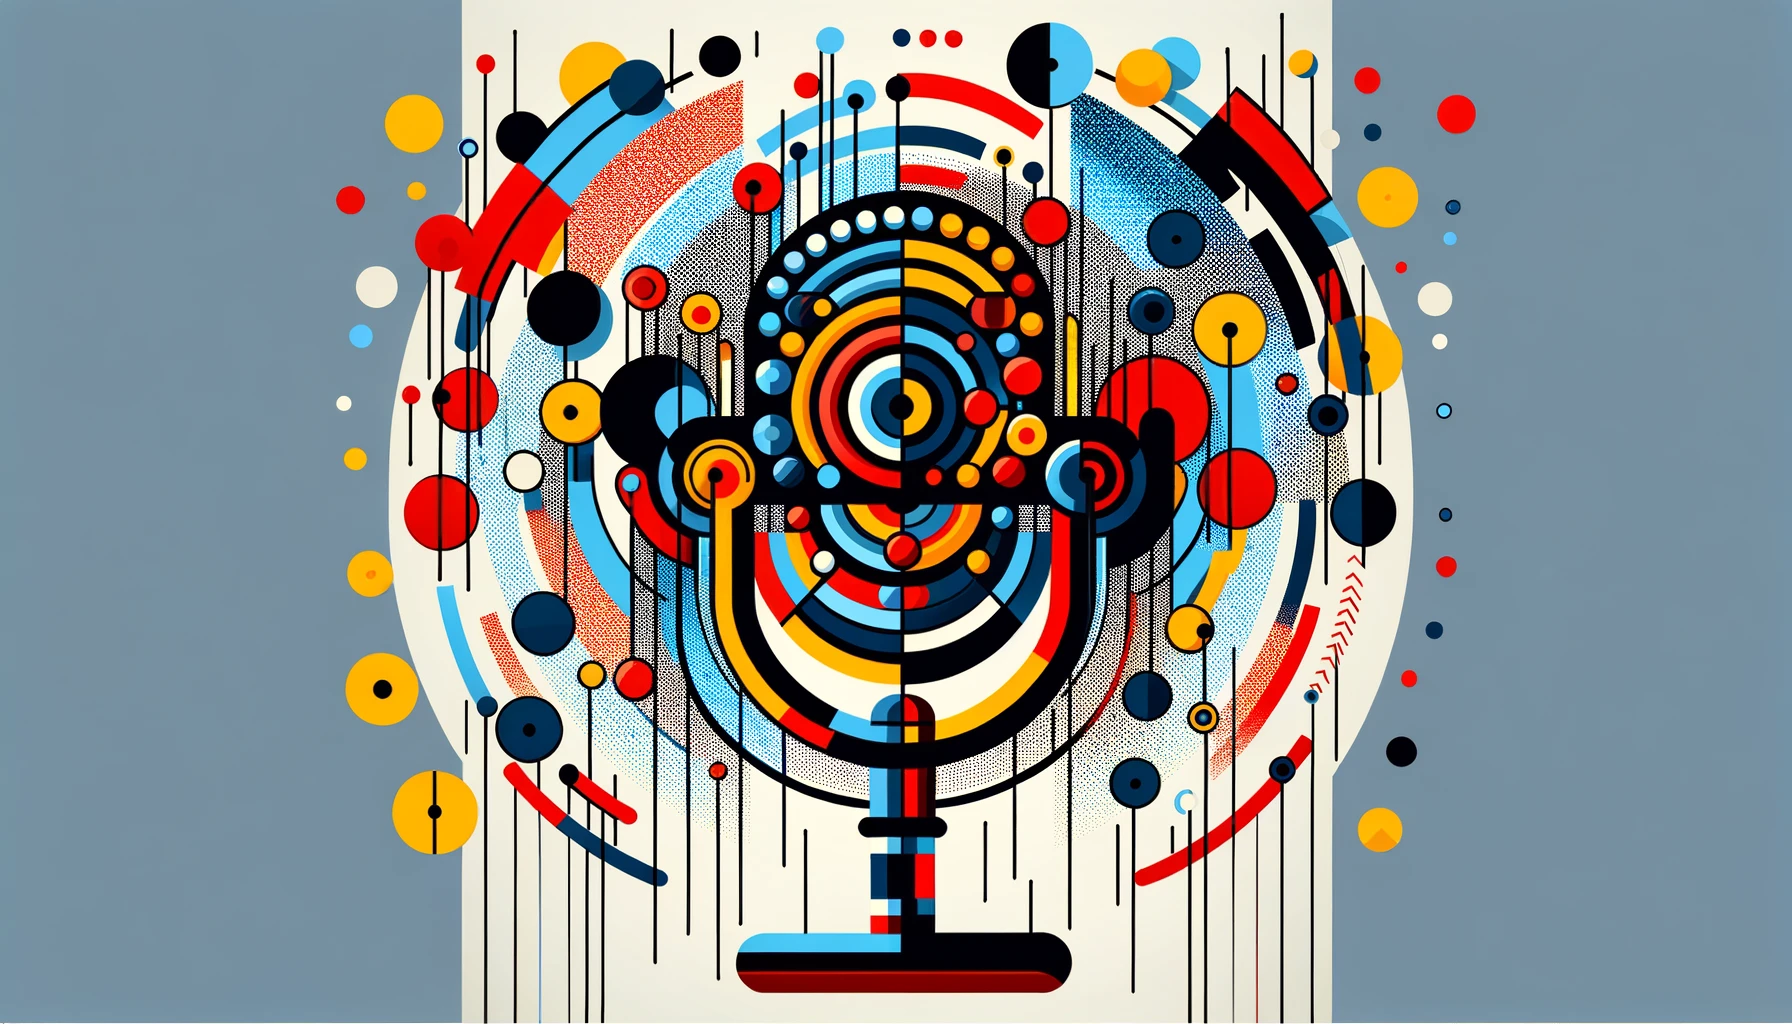 An abstract, colorful representation of a microcast featuring geometric shapes. The central abstract microphone is crafted from overlapping circles and lines in bright red, yellow, and blue, set against a light and dark gray gradient background. Surrounding the microphone, abstract sound waves are depicted as concentric circles and erratic lines, capturing the essence of broadcasting in a vibrant, non-literal form.